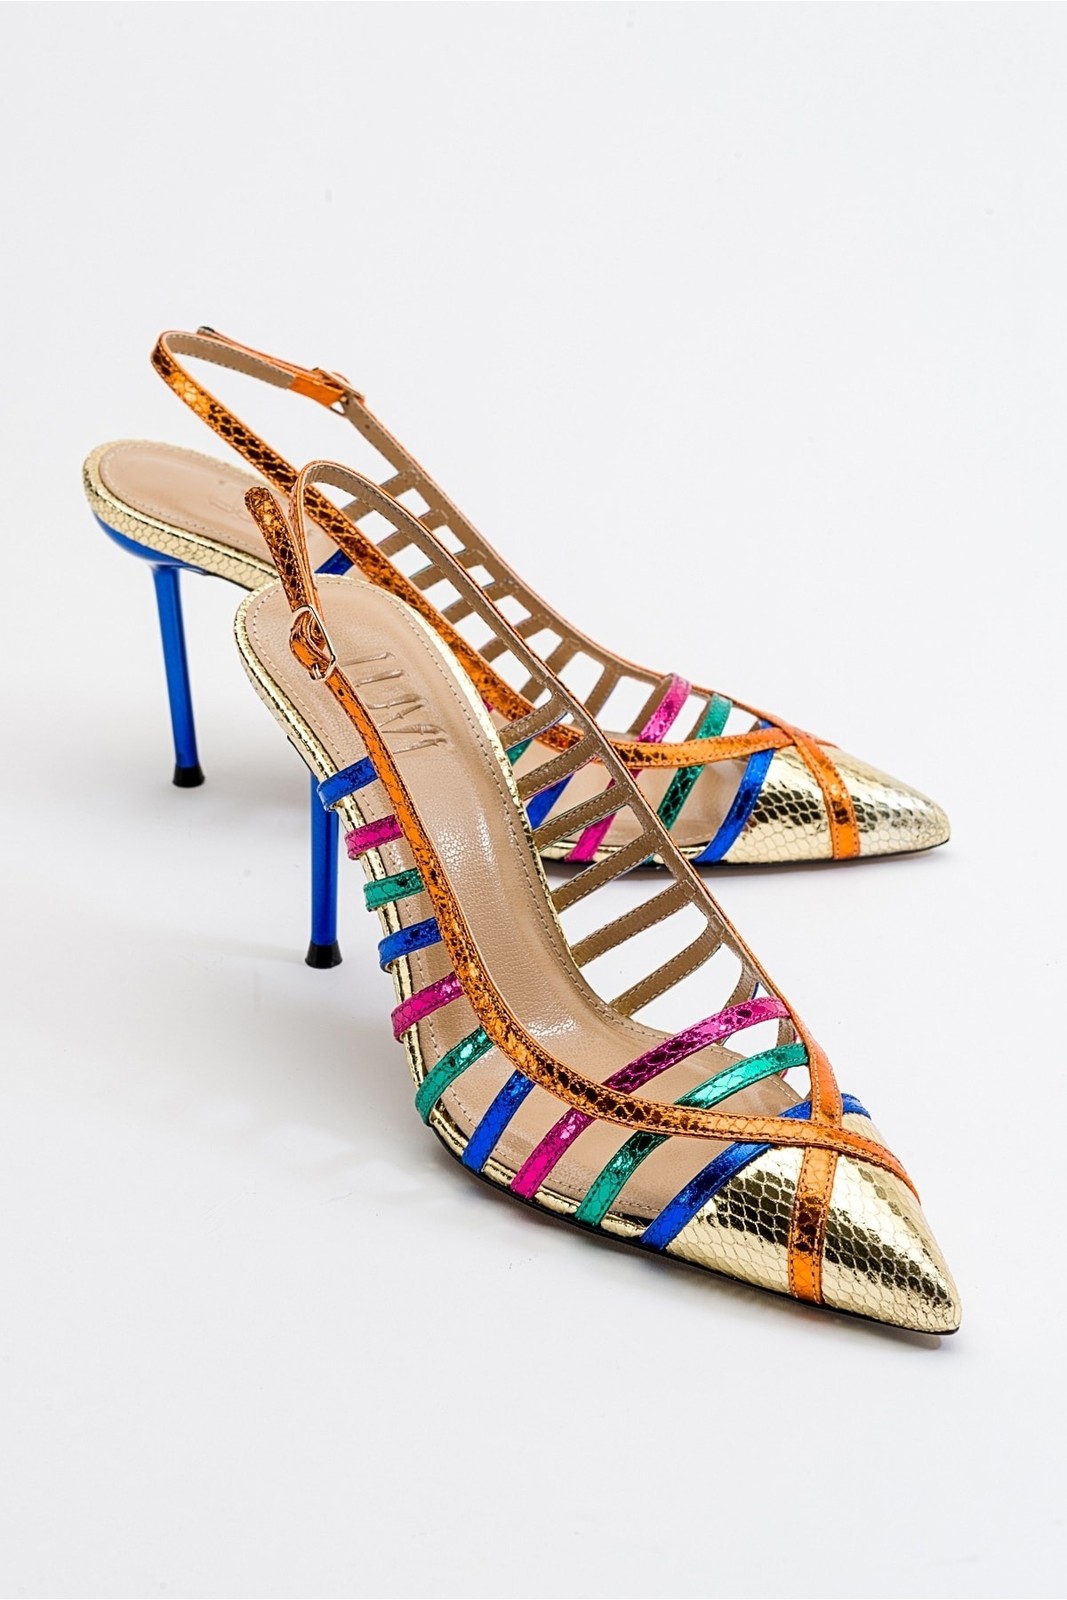 LuviShoes Gesto Gold Multi Women's Heeled Shoes